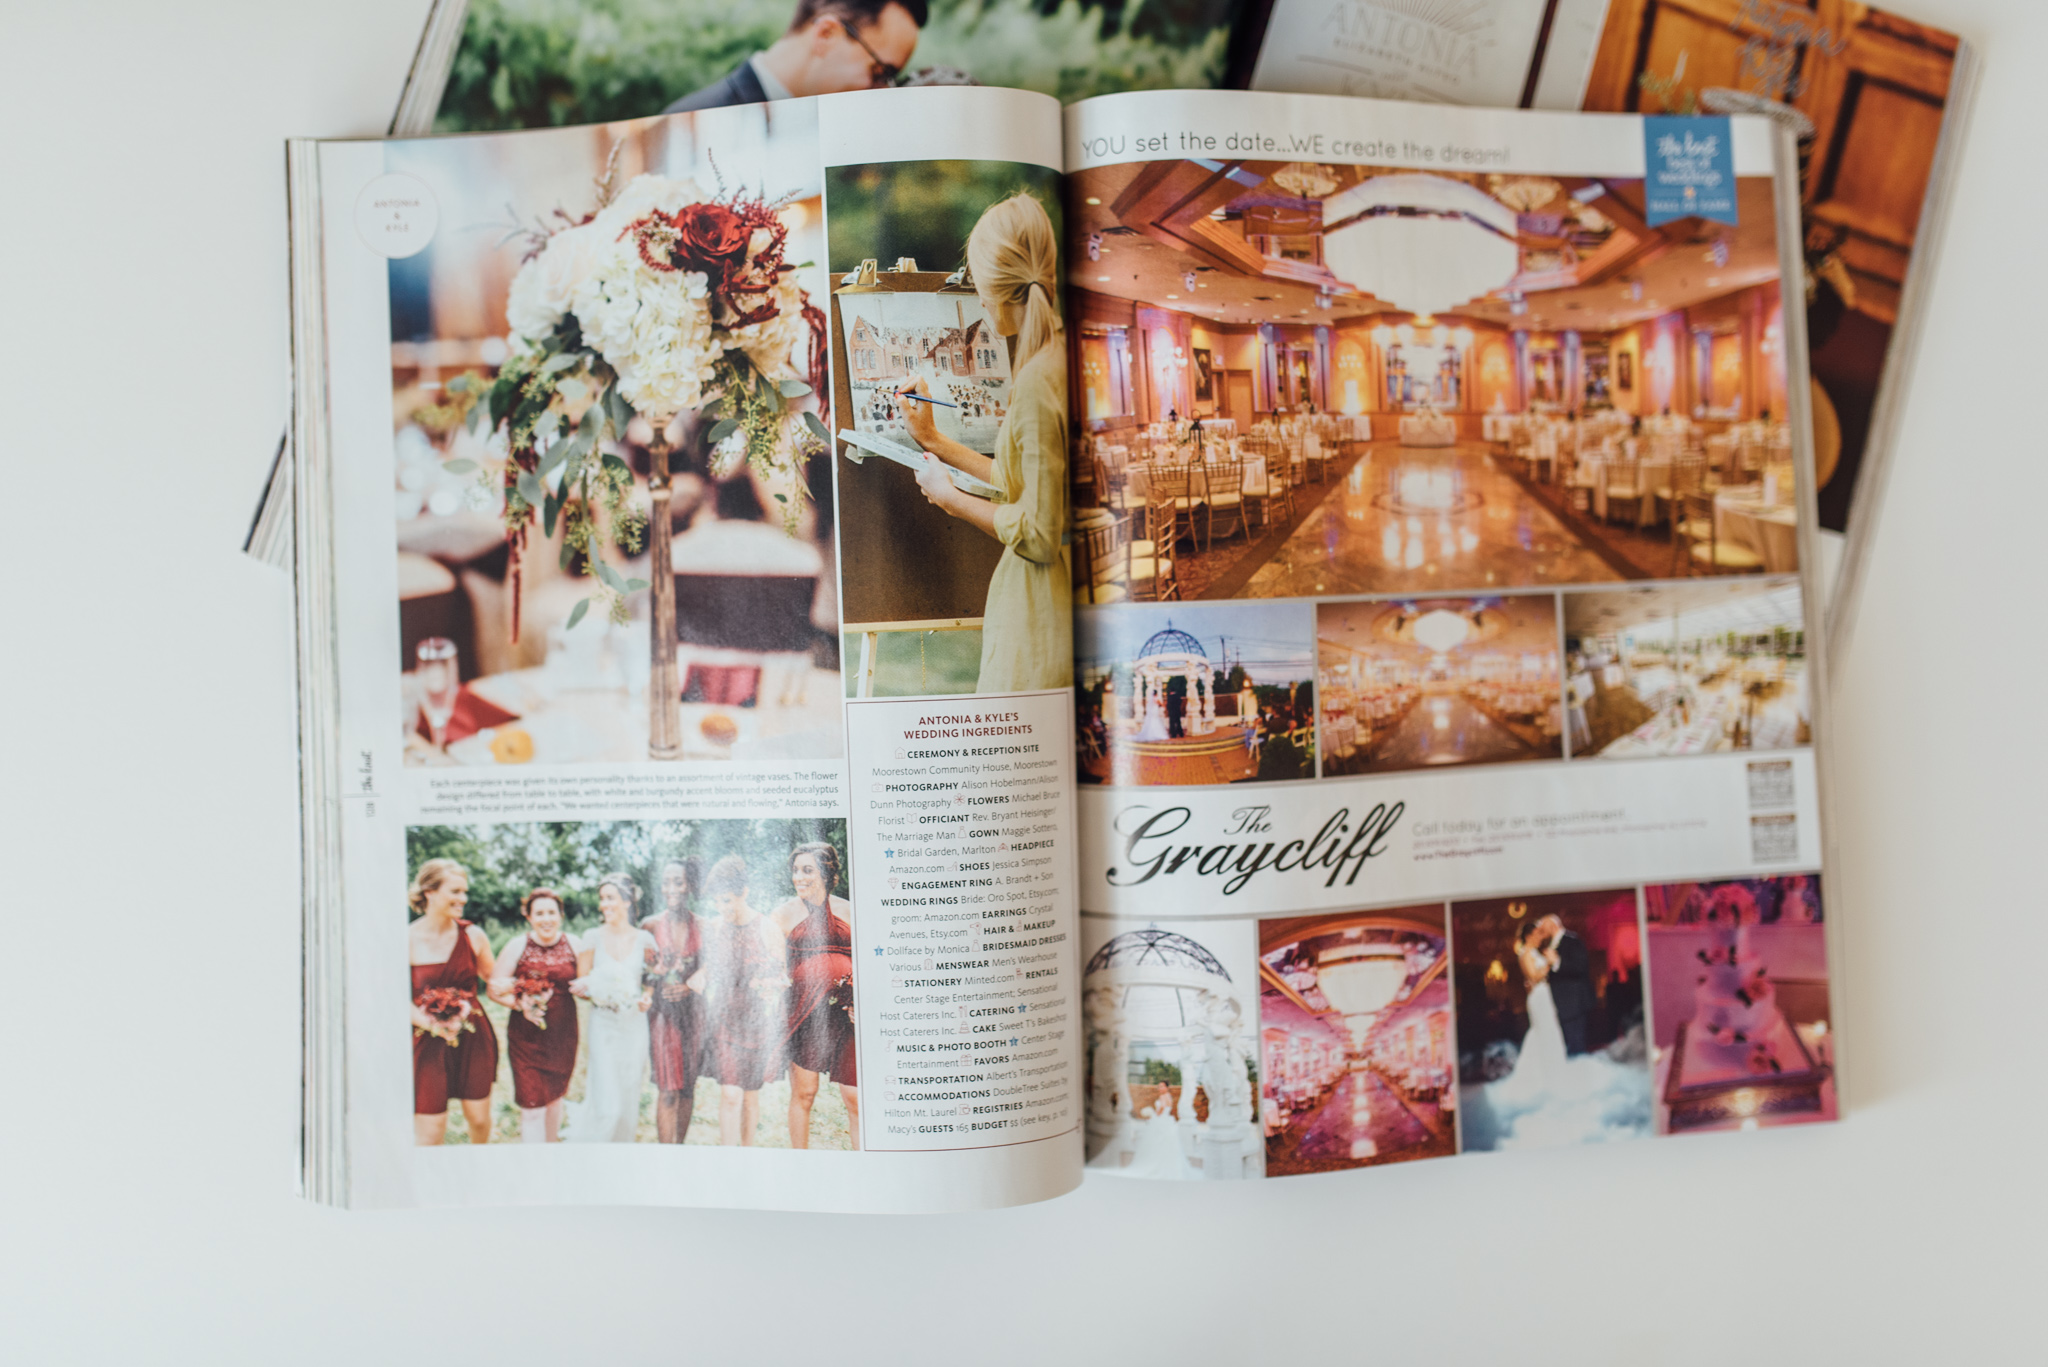 The Knot Magazine Featured Wedding - Moorestown Community House - Burlington County New Jersey - Alison Dunn Photography photo